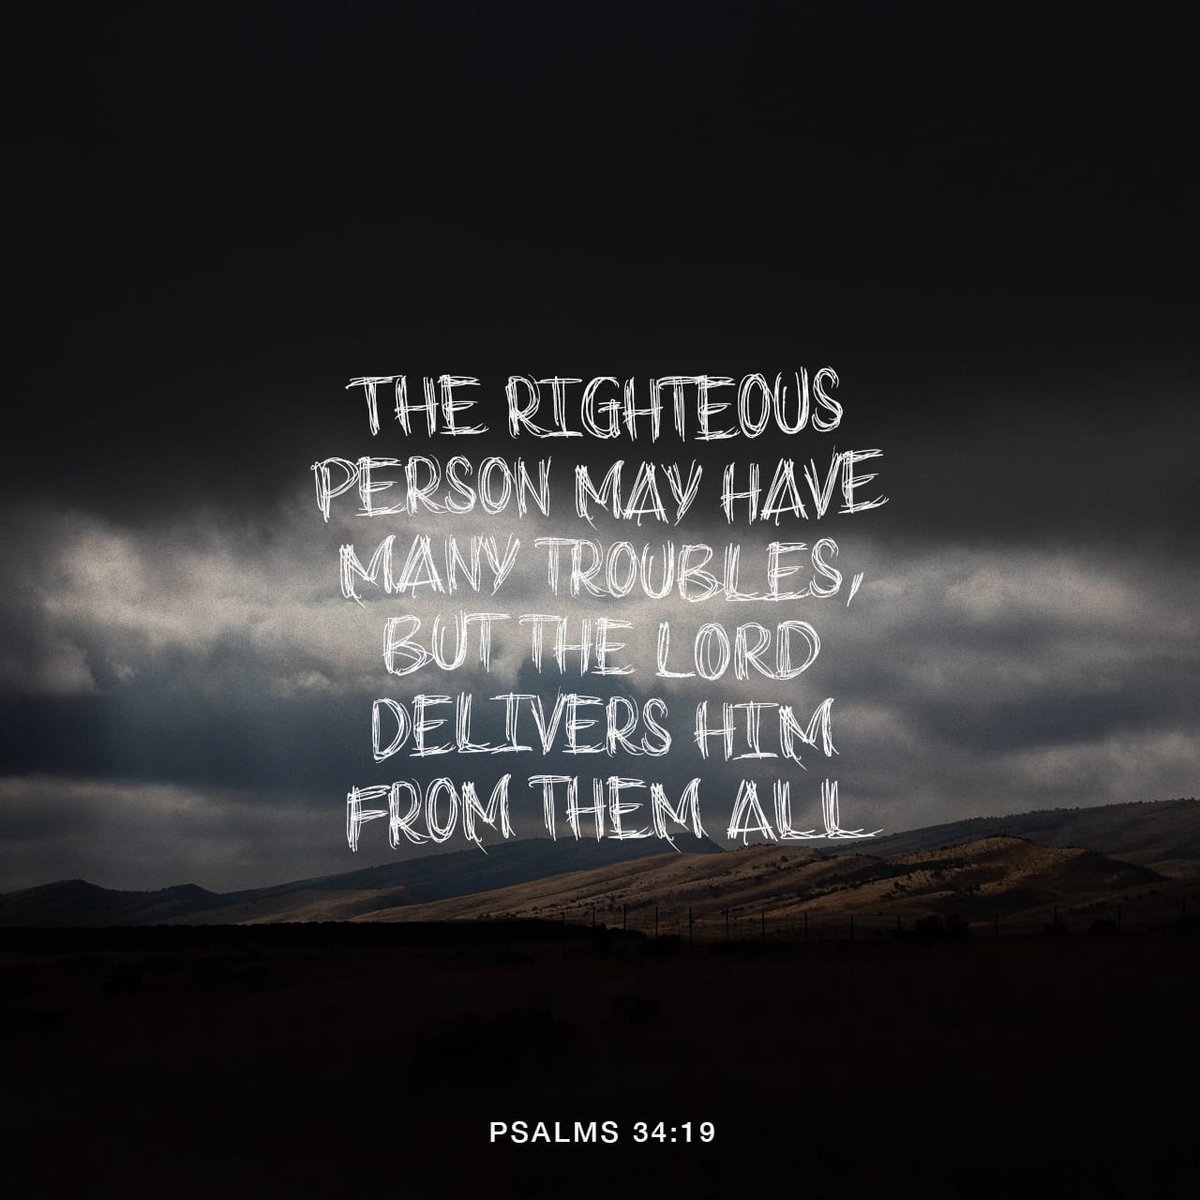 The righteous person may have many troubles, but the LORD delivers him from them all bible.com/111/PSA.34.19